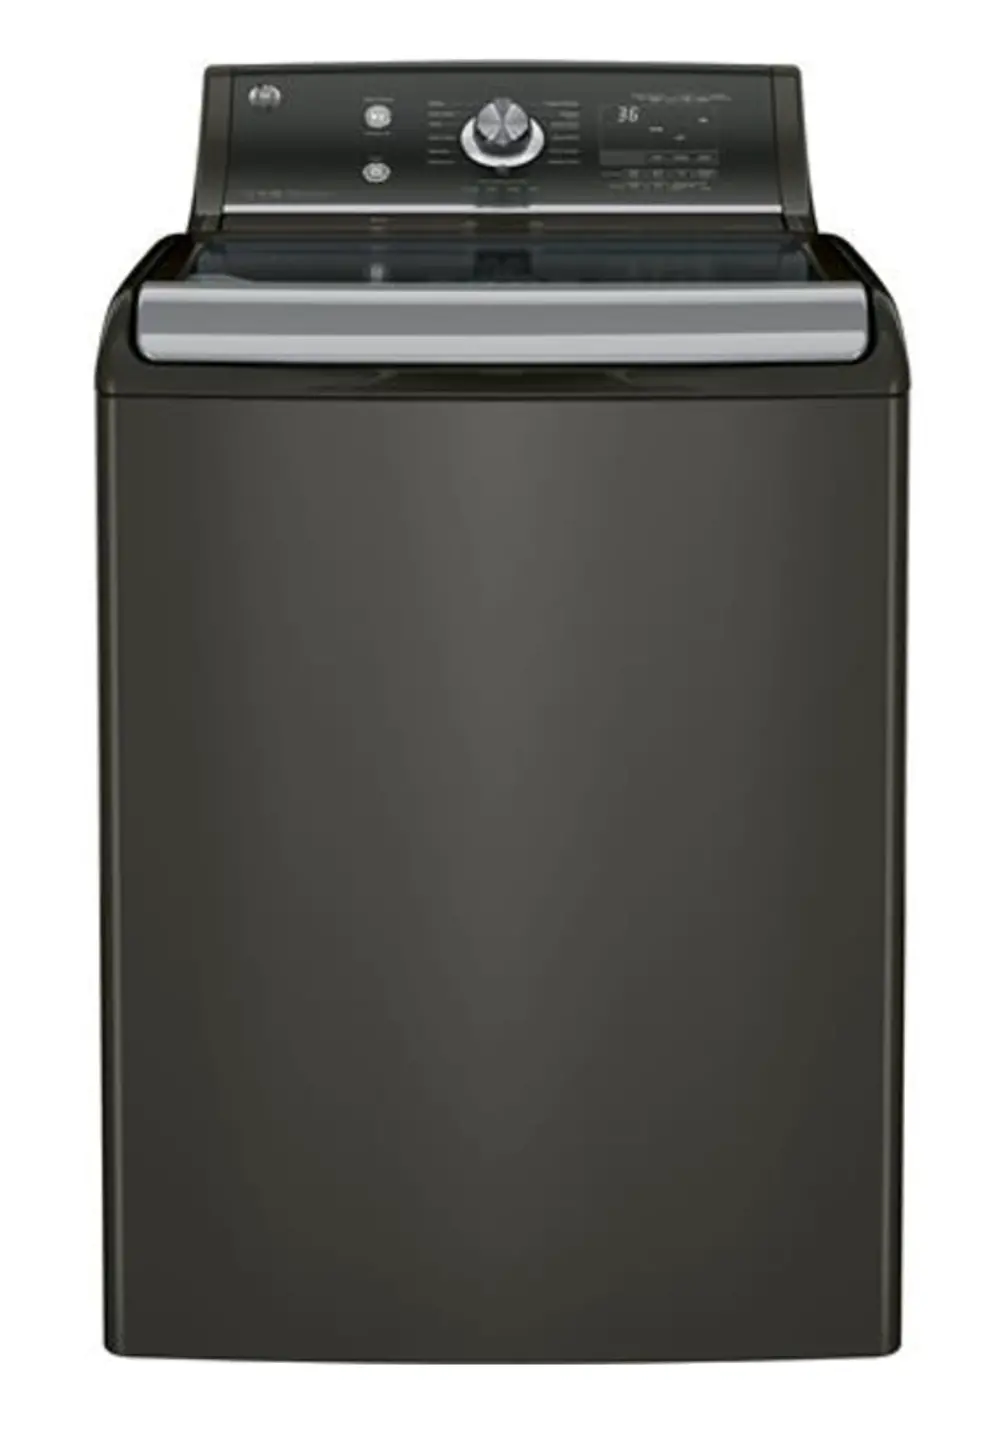 GTW810SPJMC GE 5.1 Cu. Ft. Top Load Washer-1